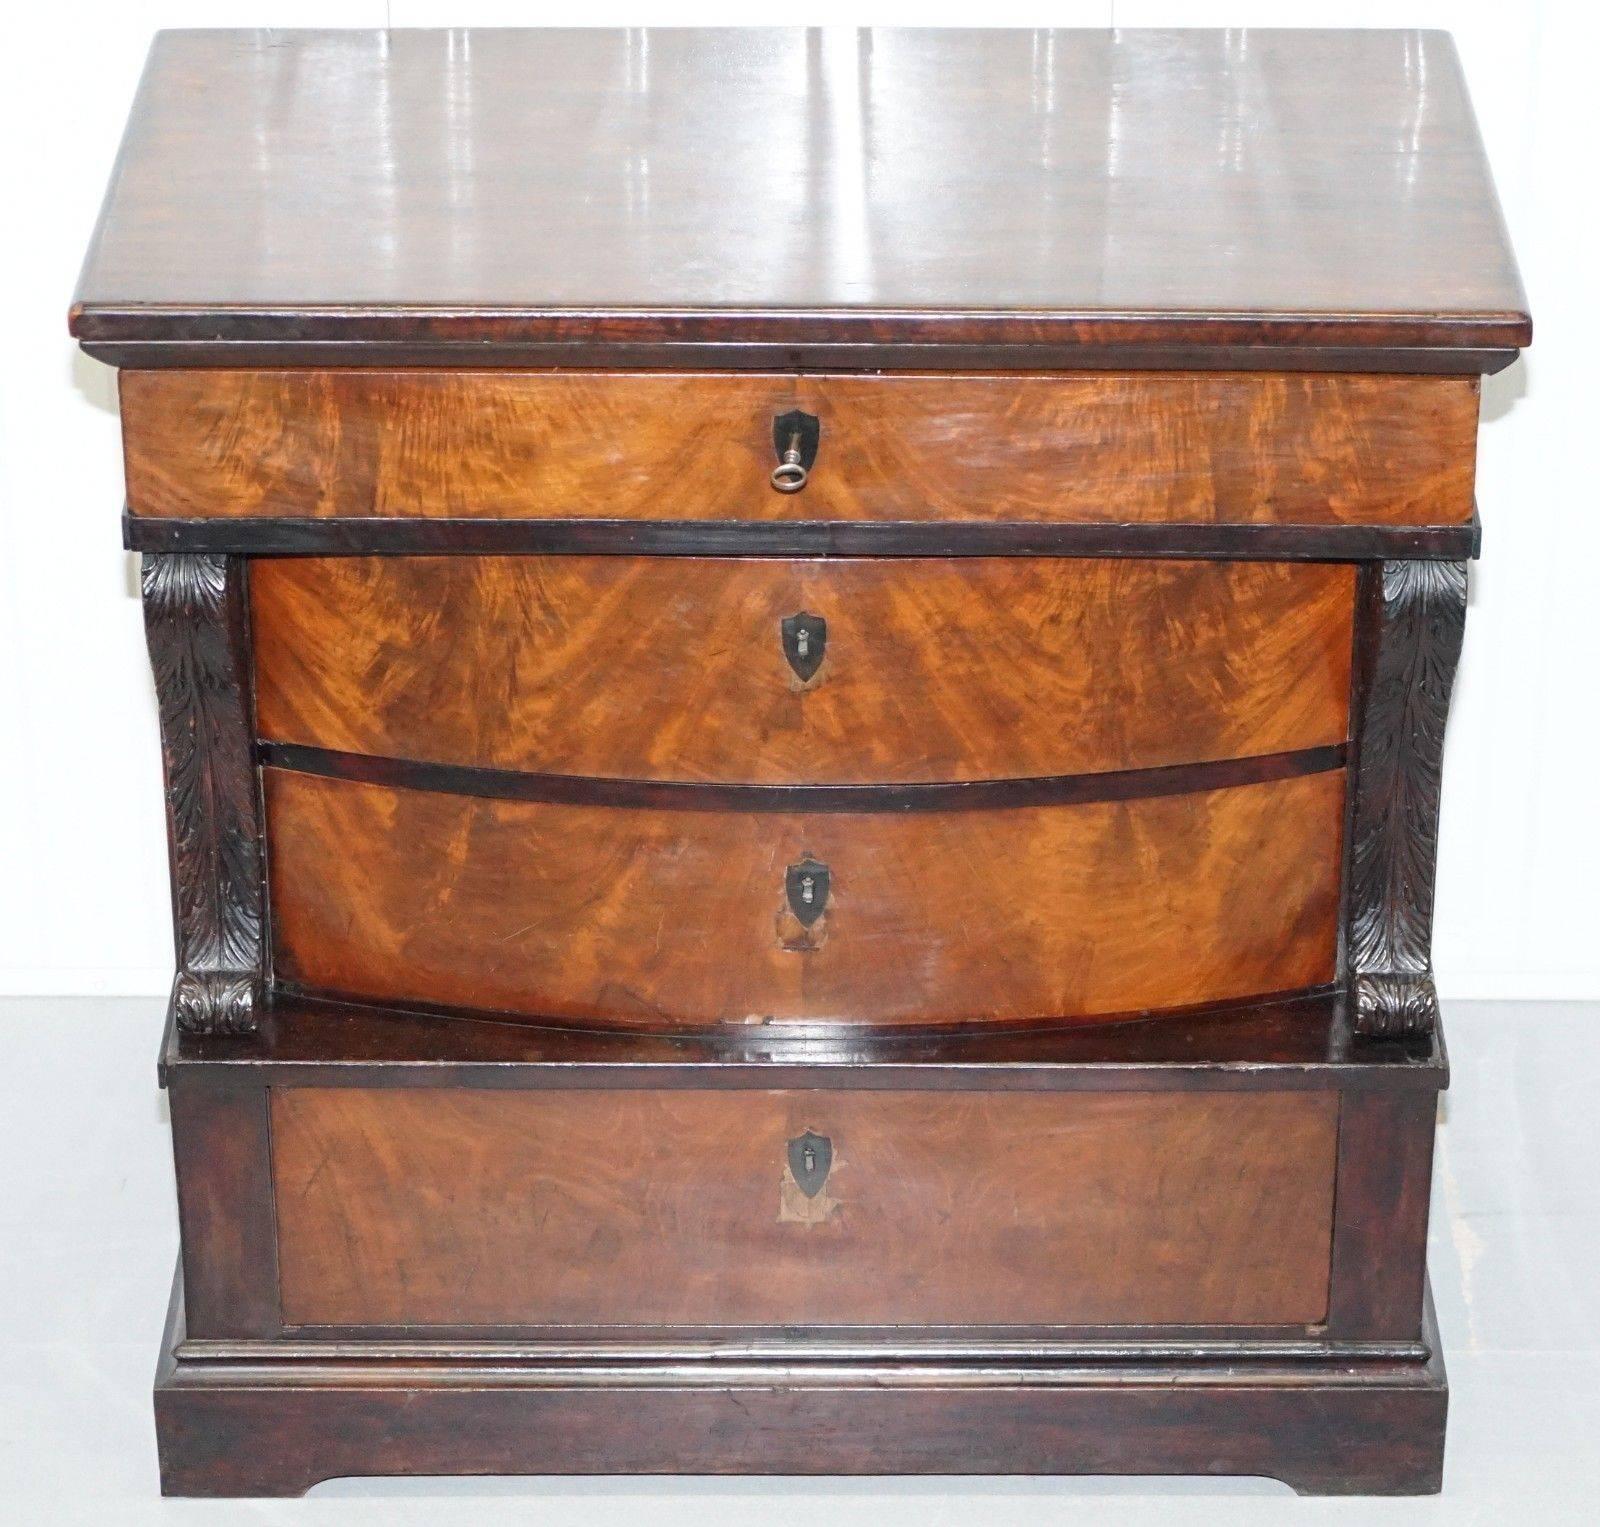 We are delighted to offer for sale this stunning French Victorian bow fronted Mahogany chest of drawers with Biedermeier style locks

An exceptional quality and well-made piece in period Victorian condition throughout. The wood has a deep rich